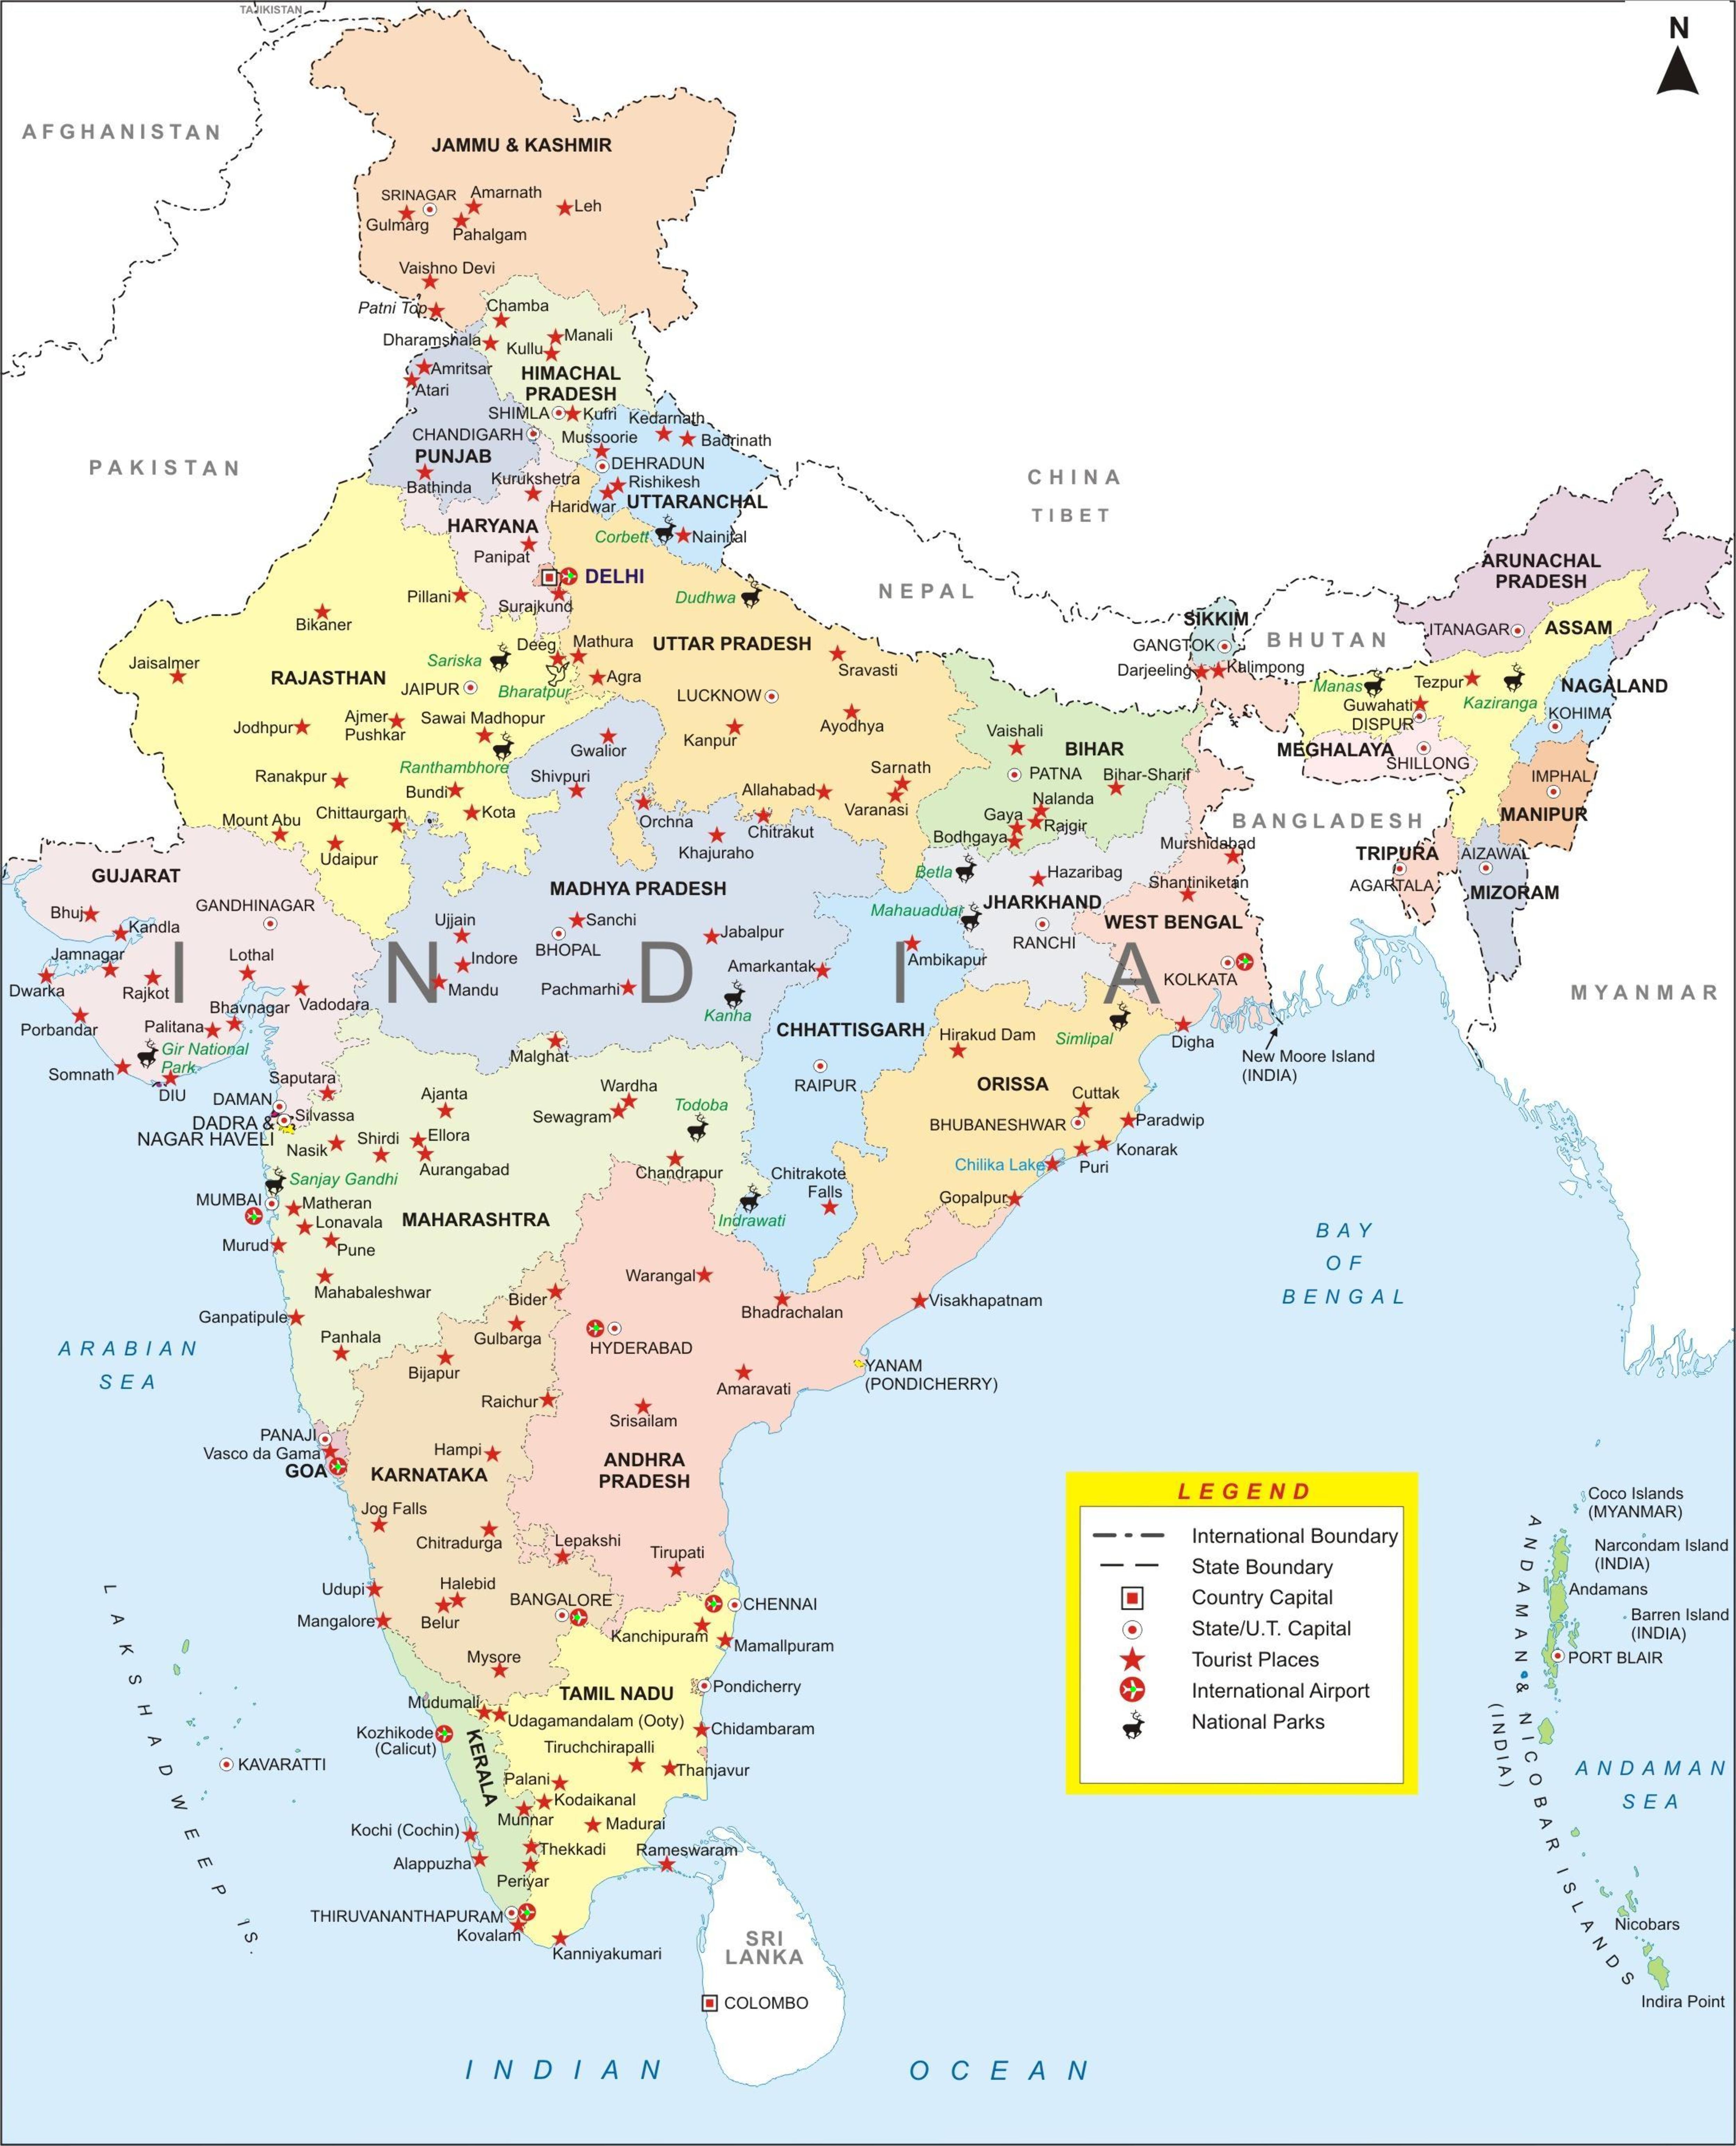 Districtâ€™s Map of India â€“ Maps of India